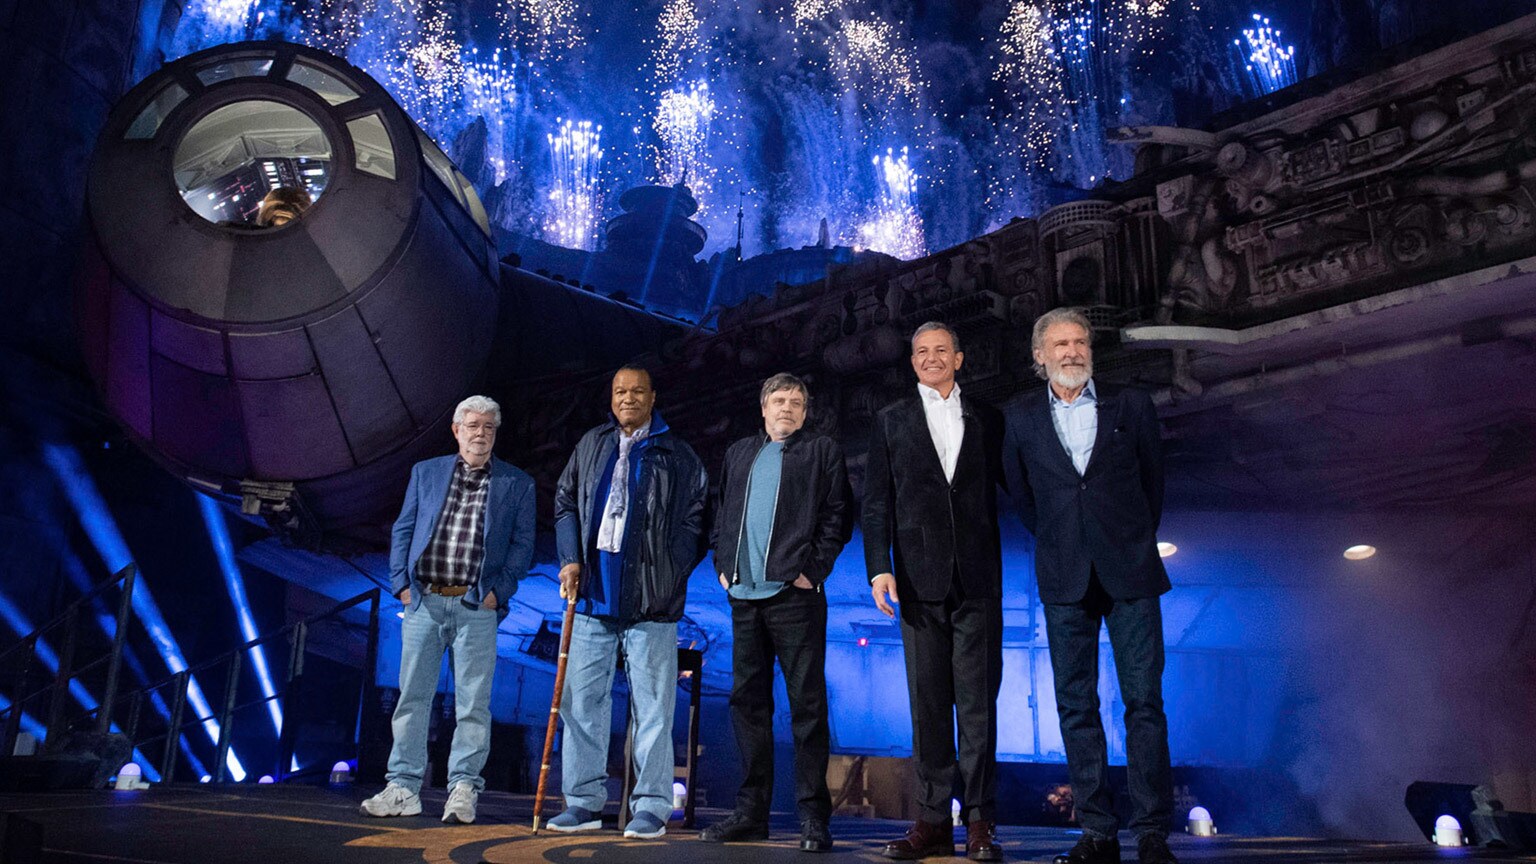 Star Wars: Galaxy’s Edge Receives Star-Studded, Emotional Opening Ceremony